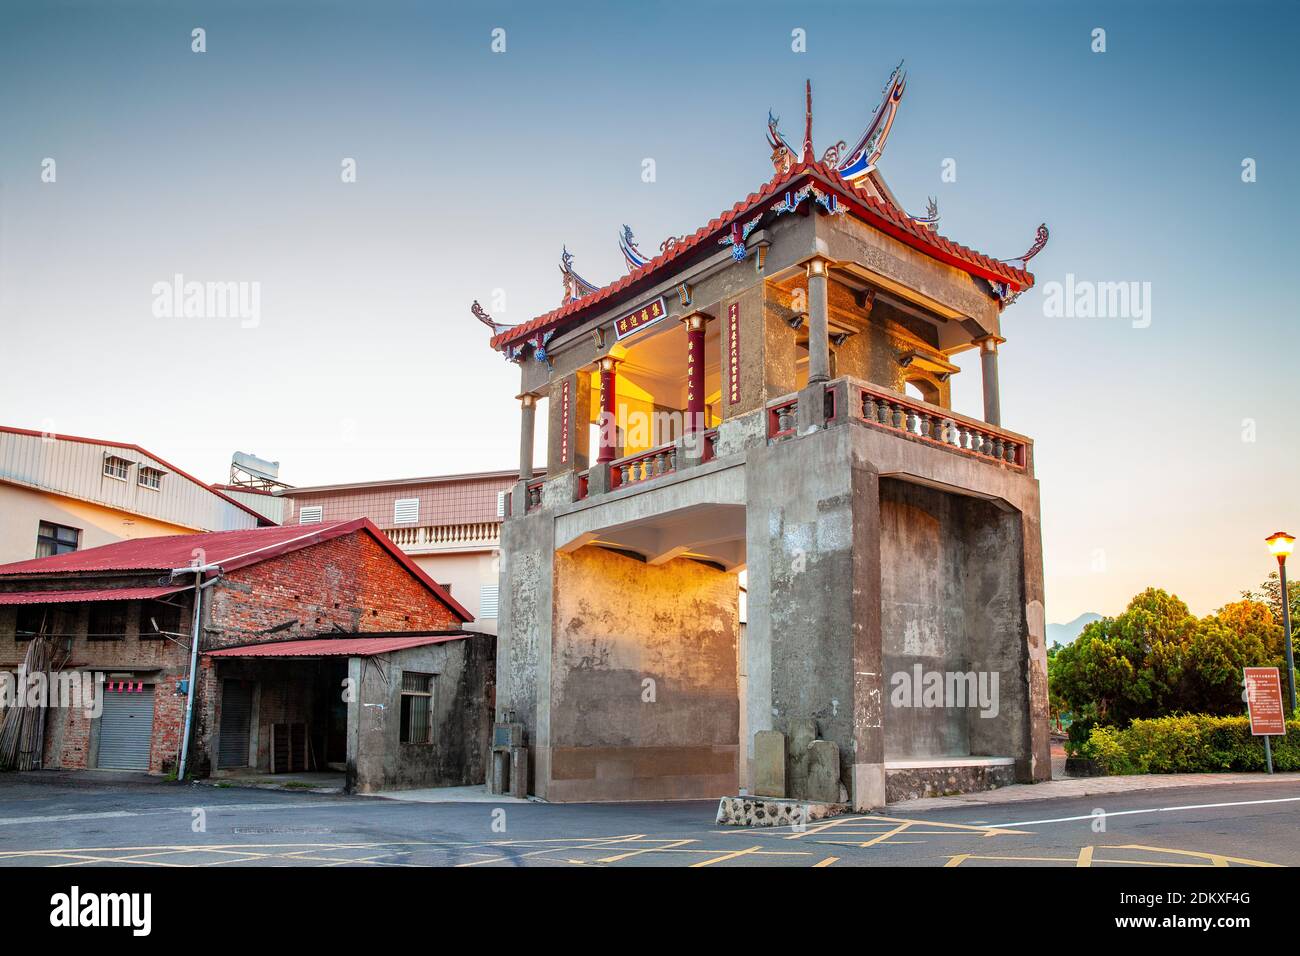 The East Gate Tower in Meinong Taiwan. The translation of the Chinese characters is 'wish you good fortune',  'A noble spirit will never perish' and ' Stock Photo